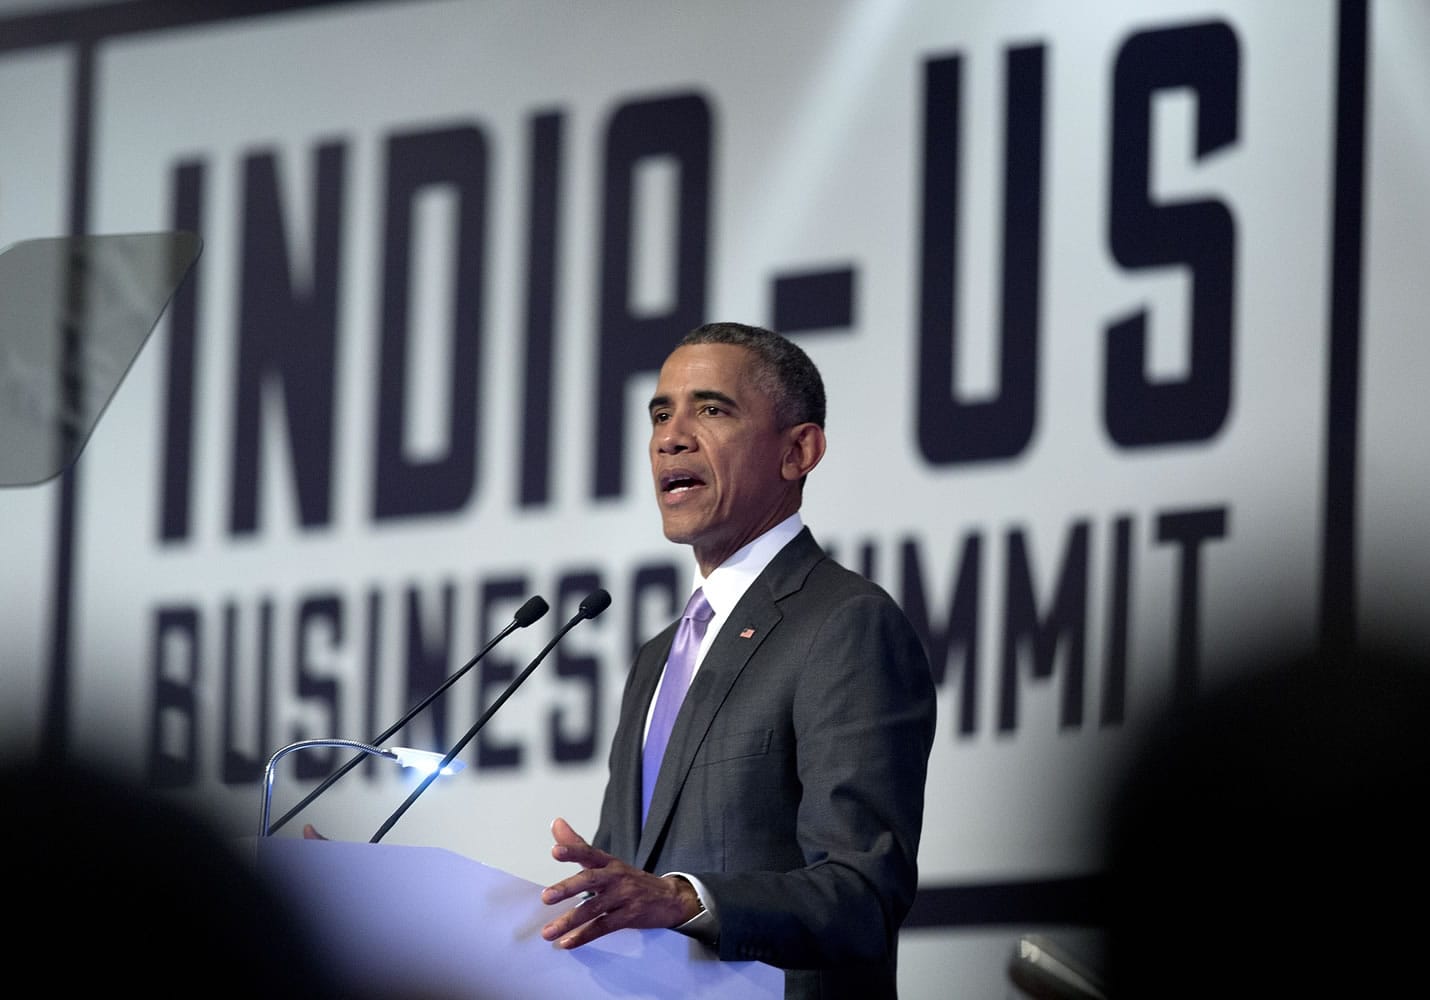 U.S President Barack Obama speaks at the CEO Summit at the Taj Palace Hotel in New Delhi, India, on Monday. Officials in both countries say Obama and Indian Prime Minister Narendra Modi developed an easy chemistry when they first met in Washington last fall.